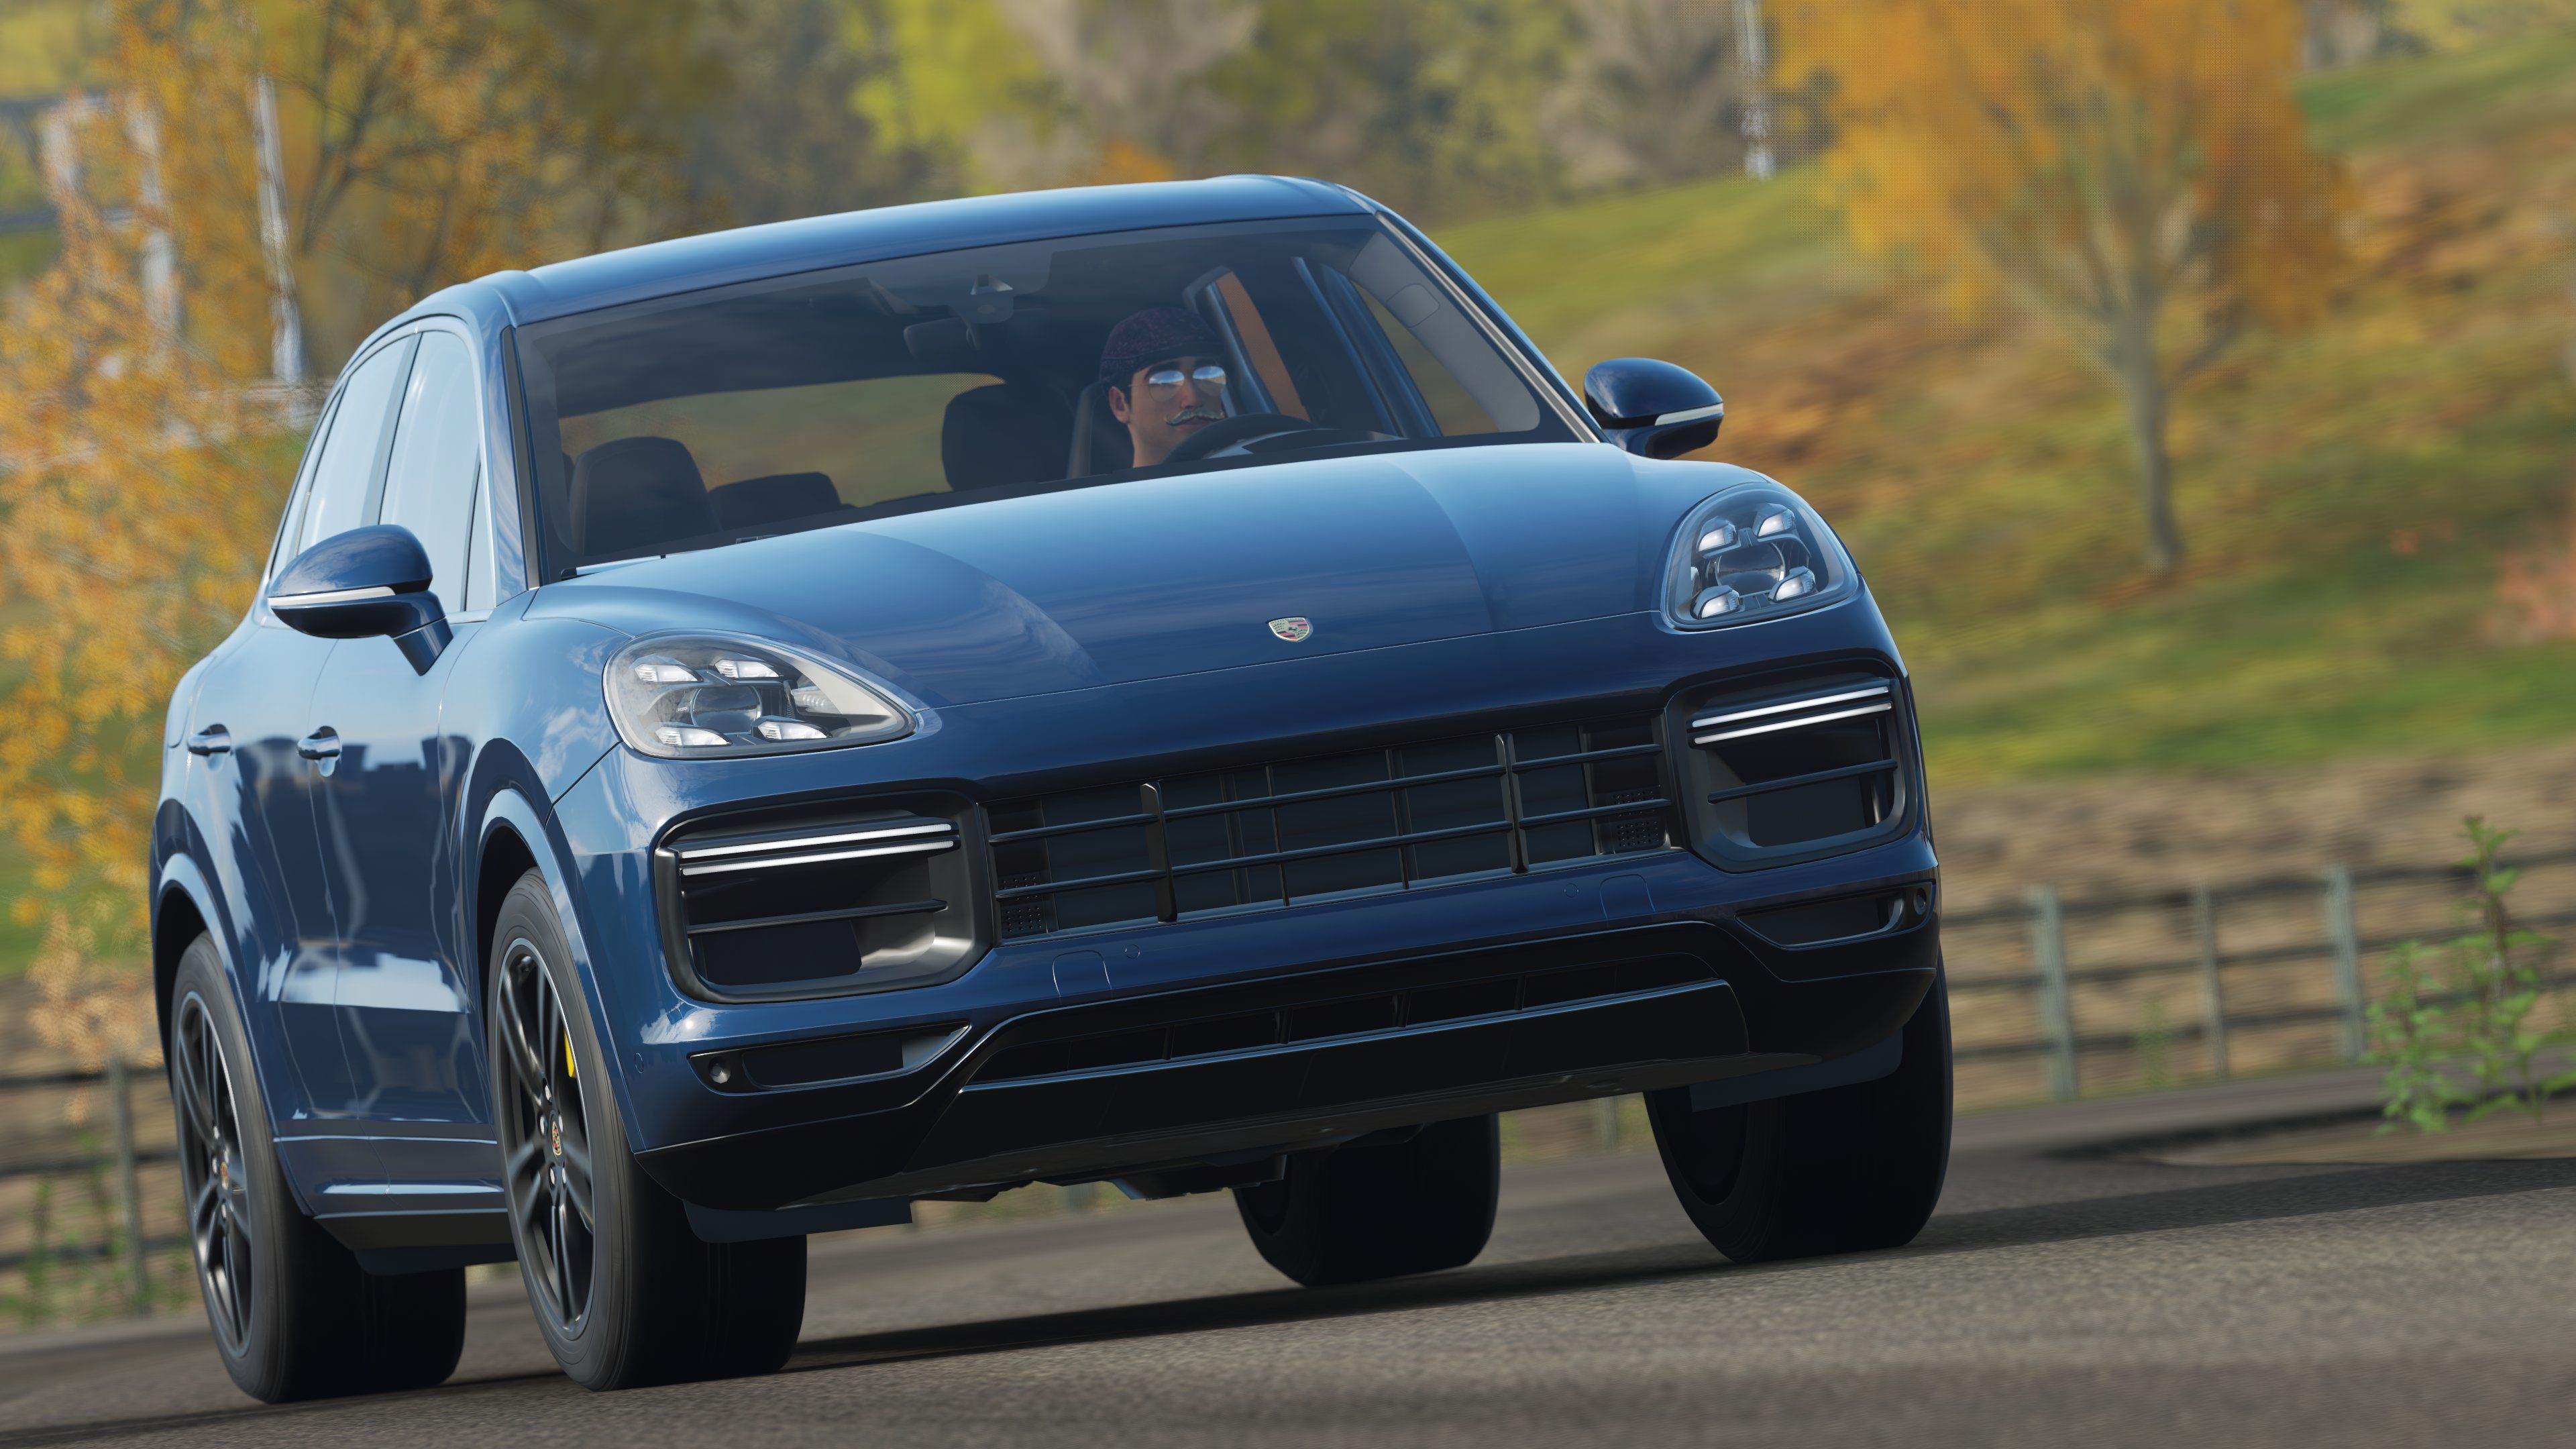 Porsche Cayenne Turbo Coupe hd specifications